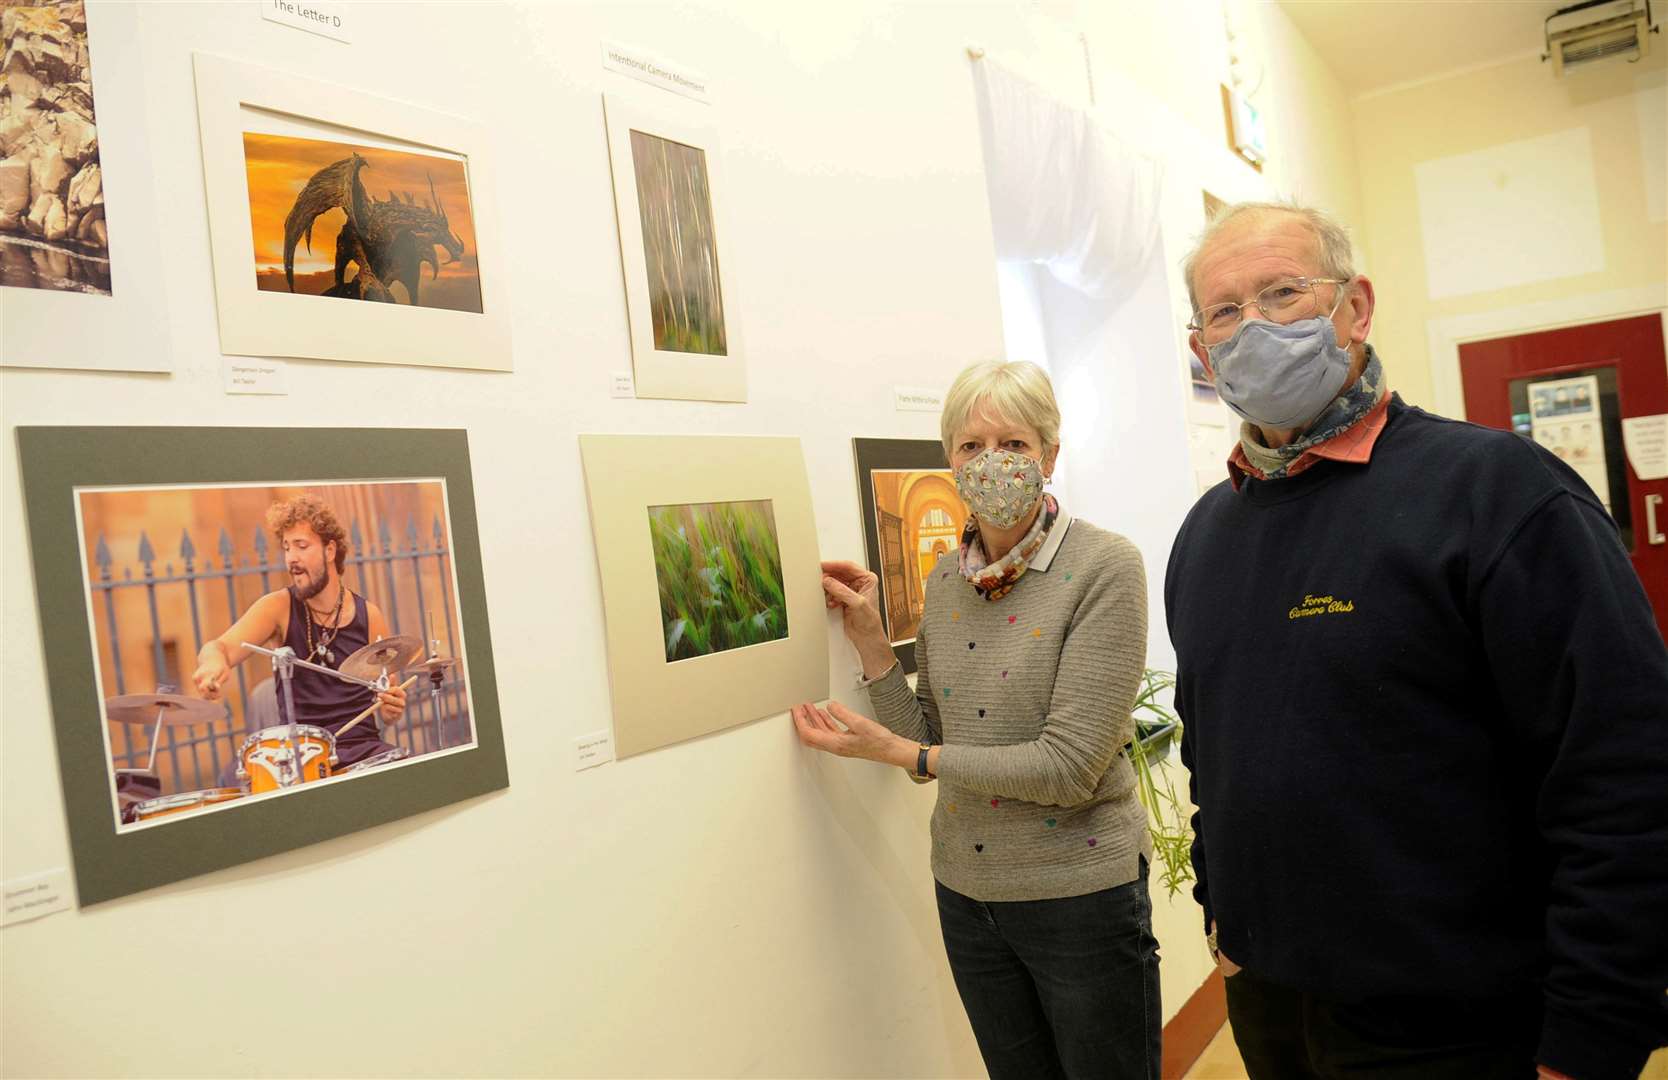 Camera Club snappers Rhona Cameron and Ian McLennan showing off some of the pictures on display.